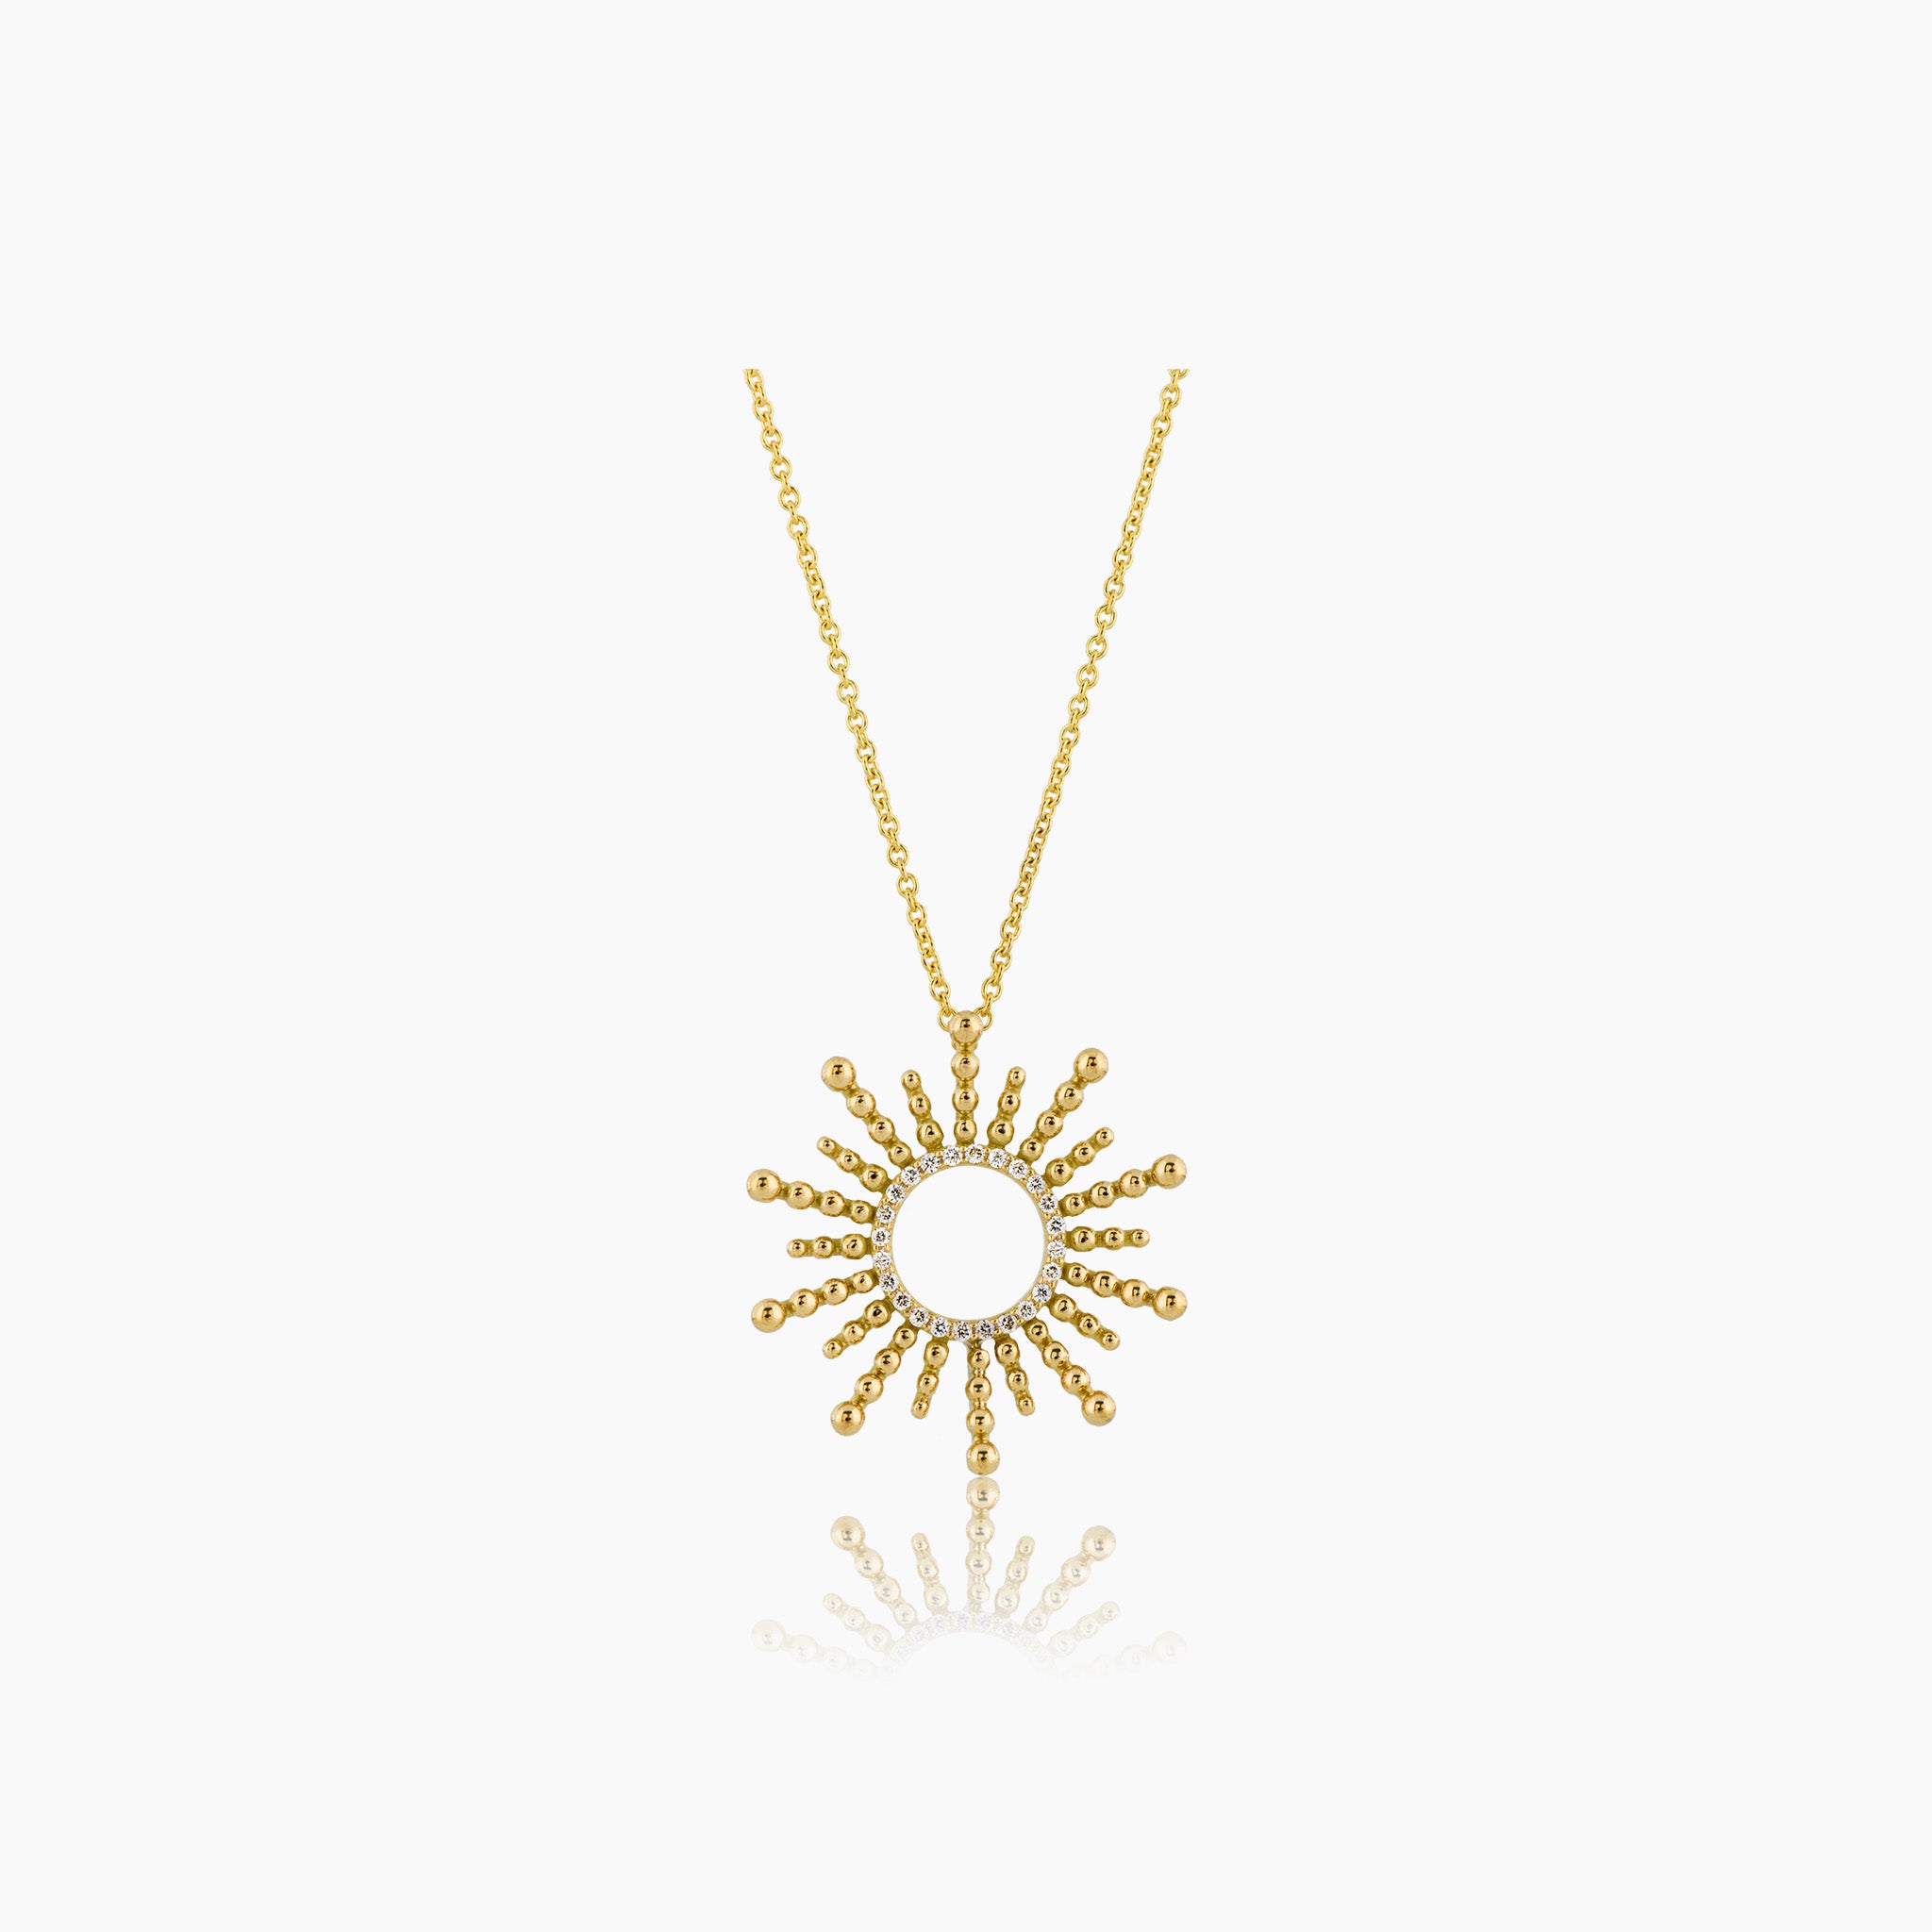 A beautifully crafted pendant made of gleaming yellow gold and diamonds, displayed elegantly on an off white background. 